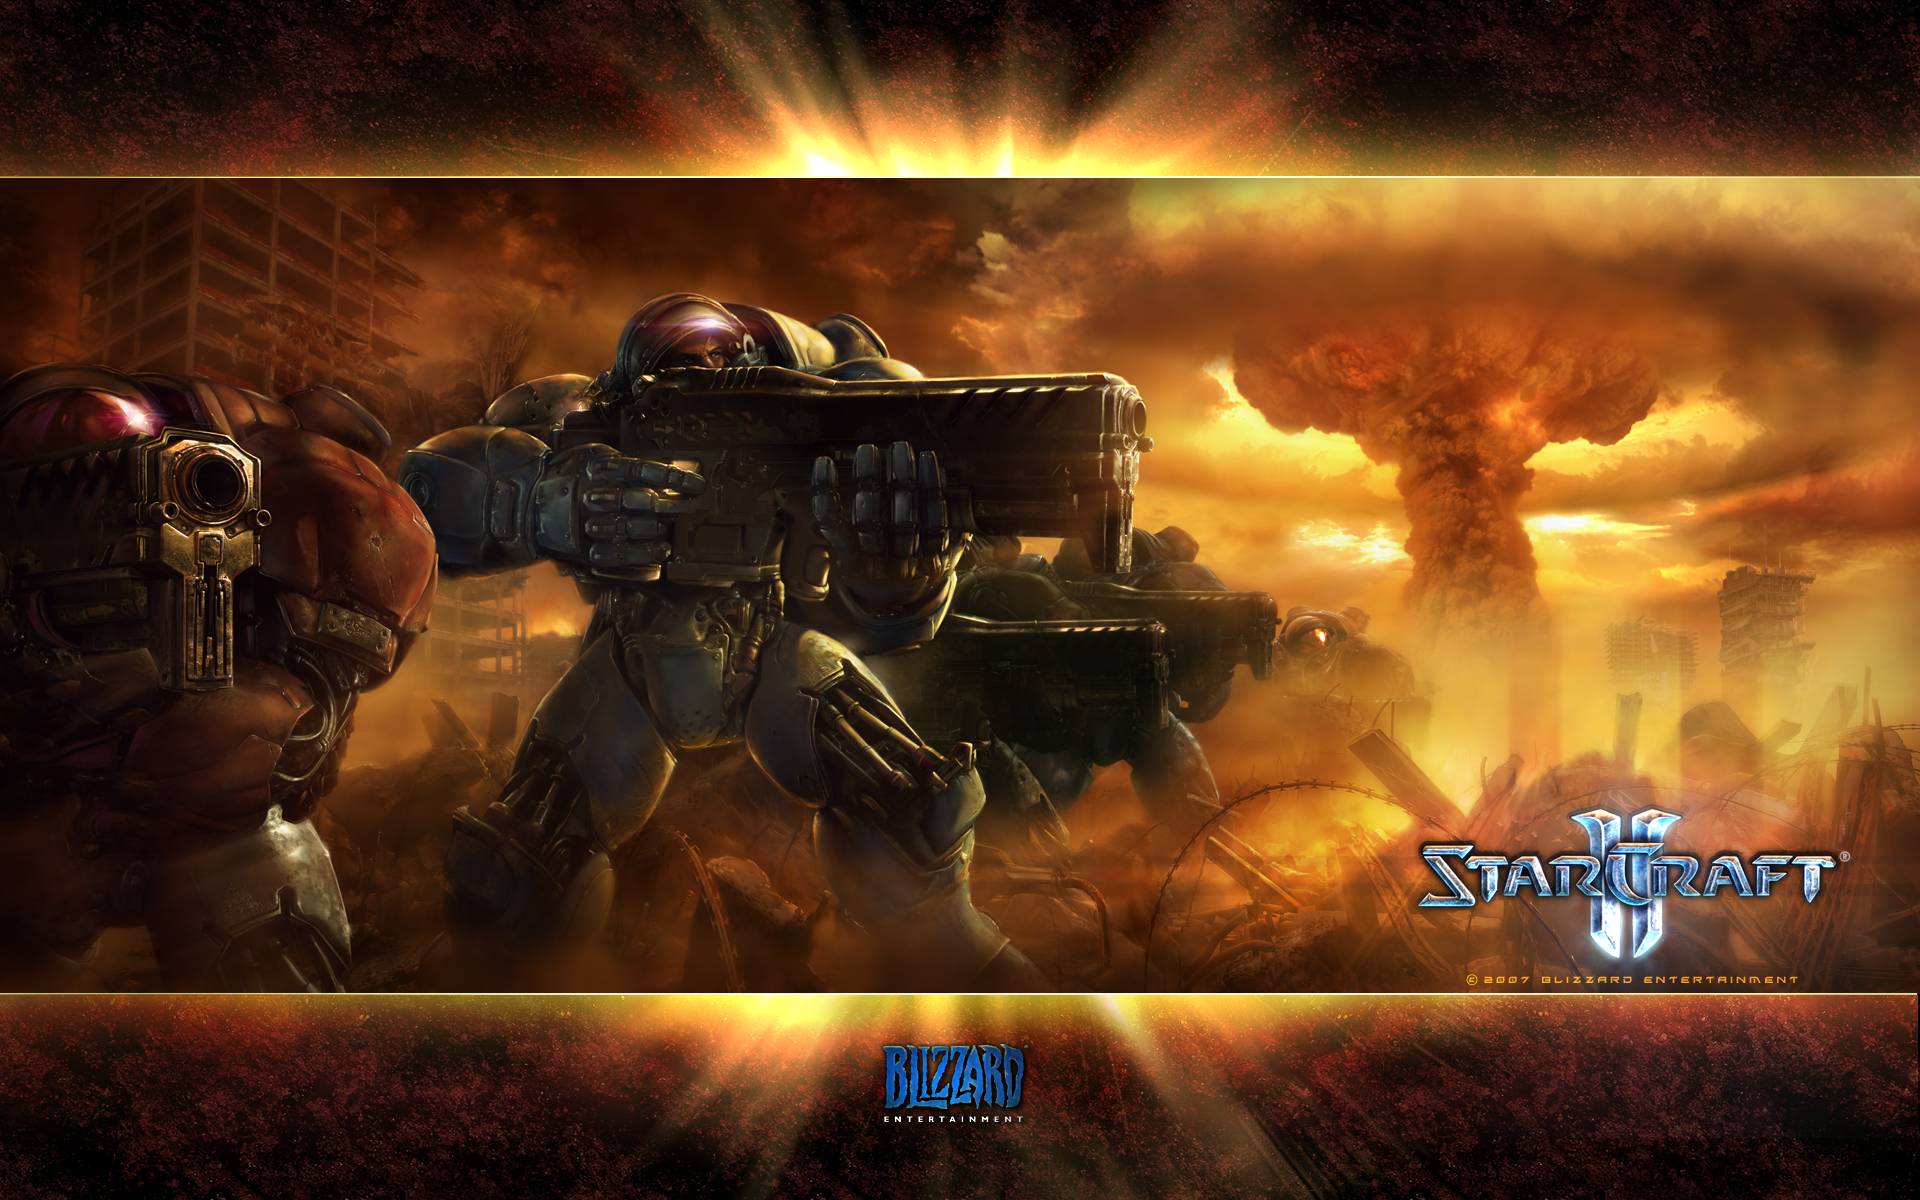 Starcraft 2 and HD Wallpaper in Starcraft 2